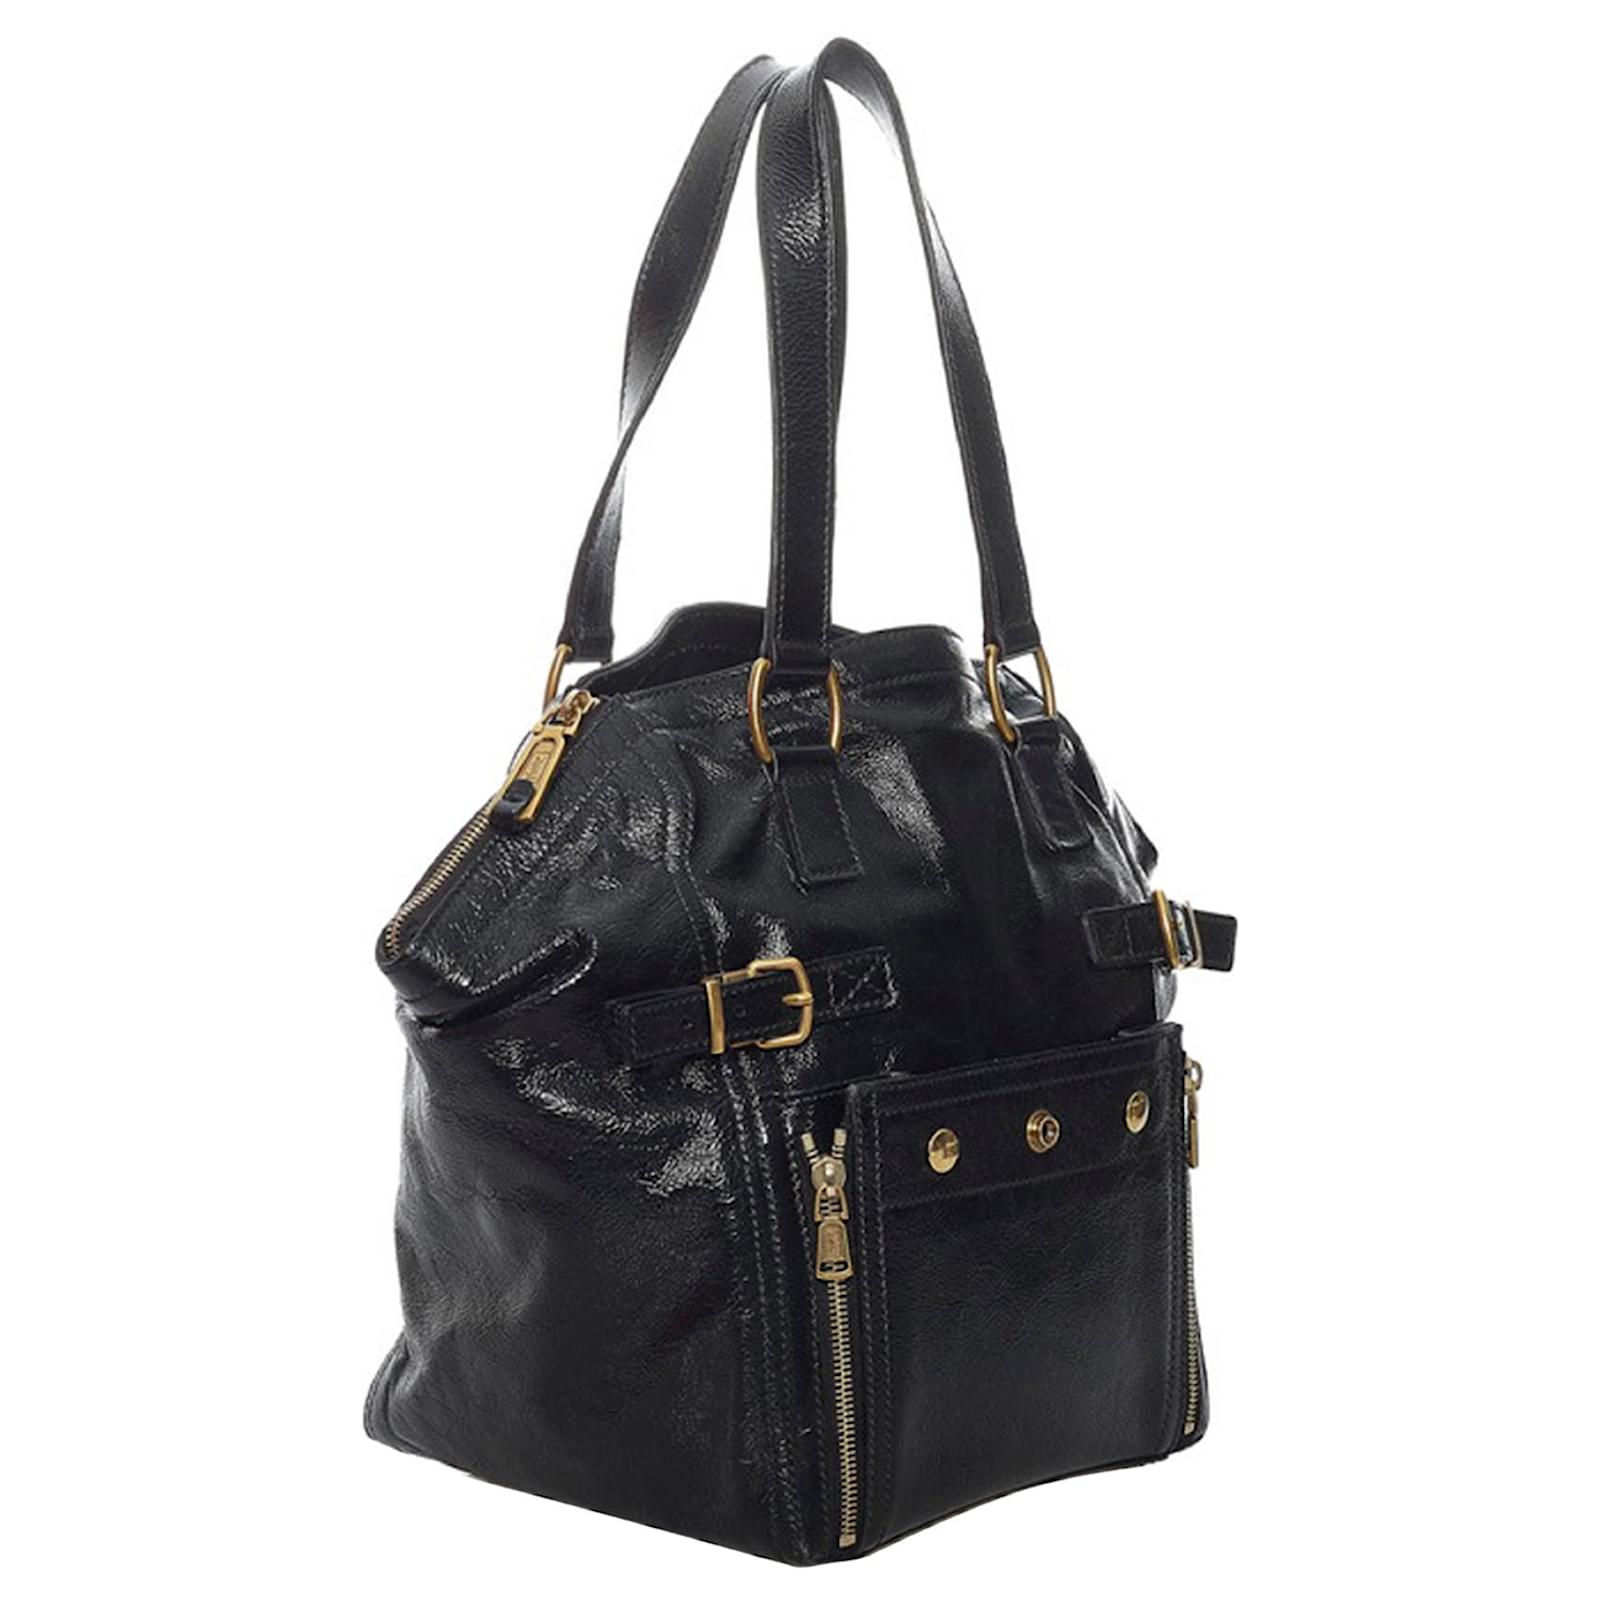 Yves Saint Laurent YSL Black Downtown Leather Tote Bag Pony-style ...